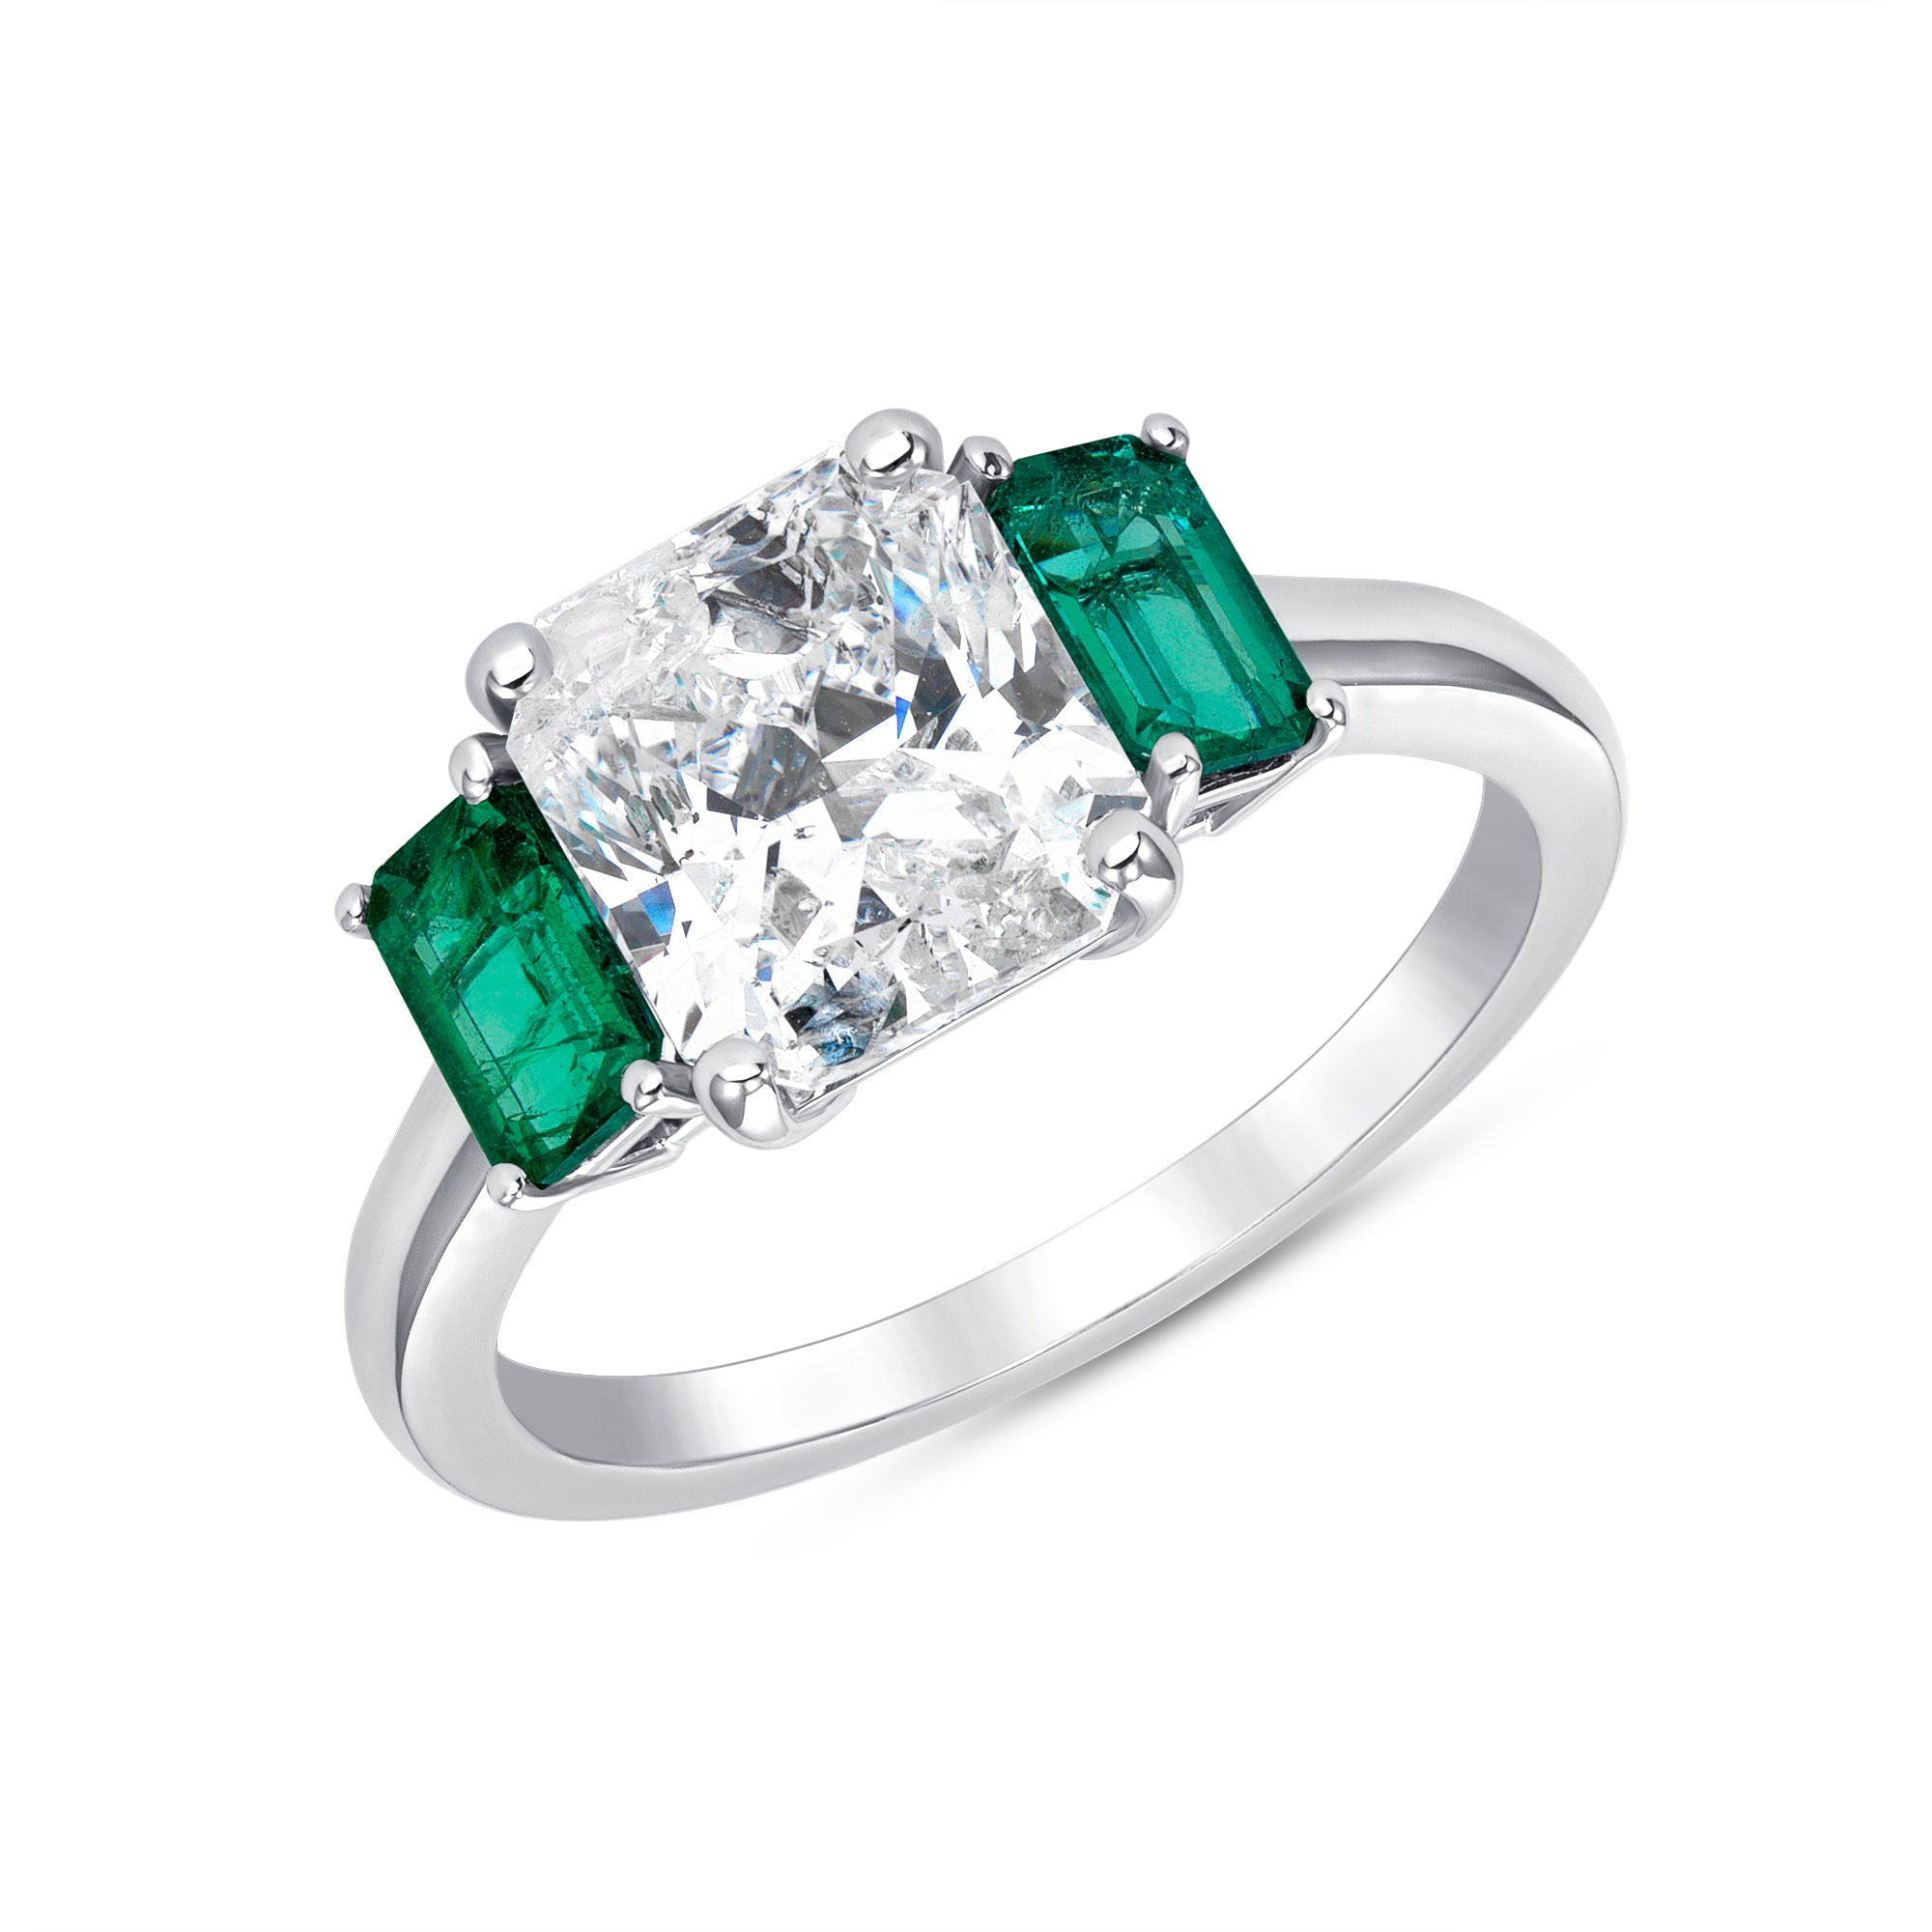 Diamond with Emerald Side Stones Ring - 2.71ct TW